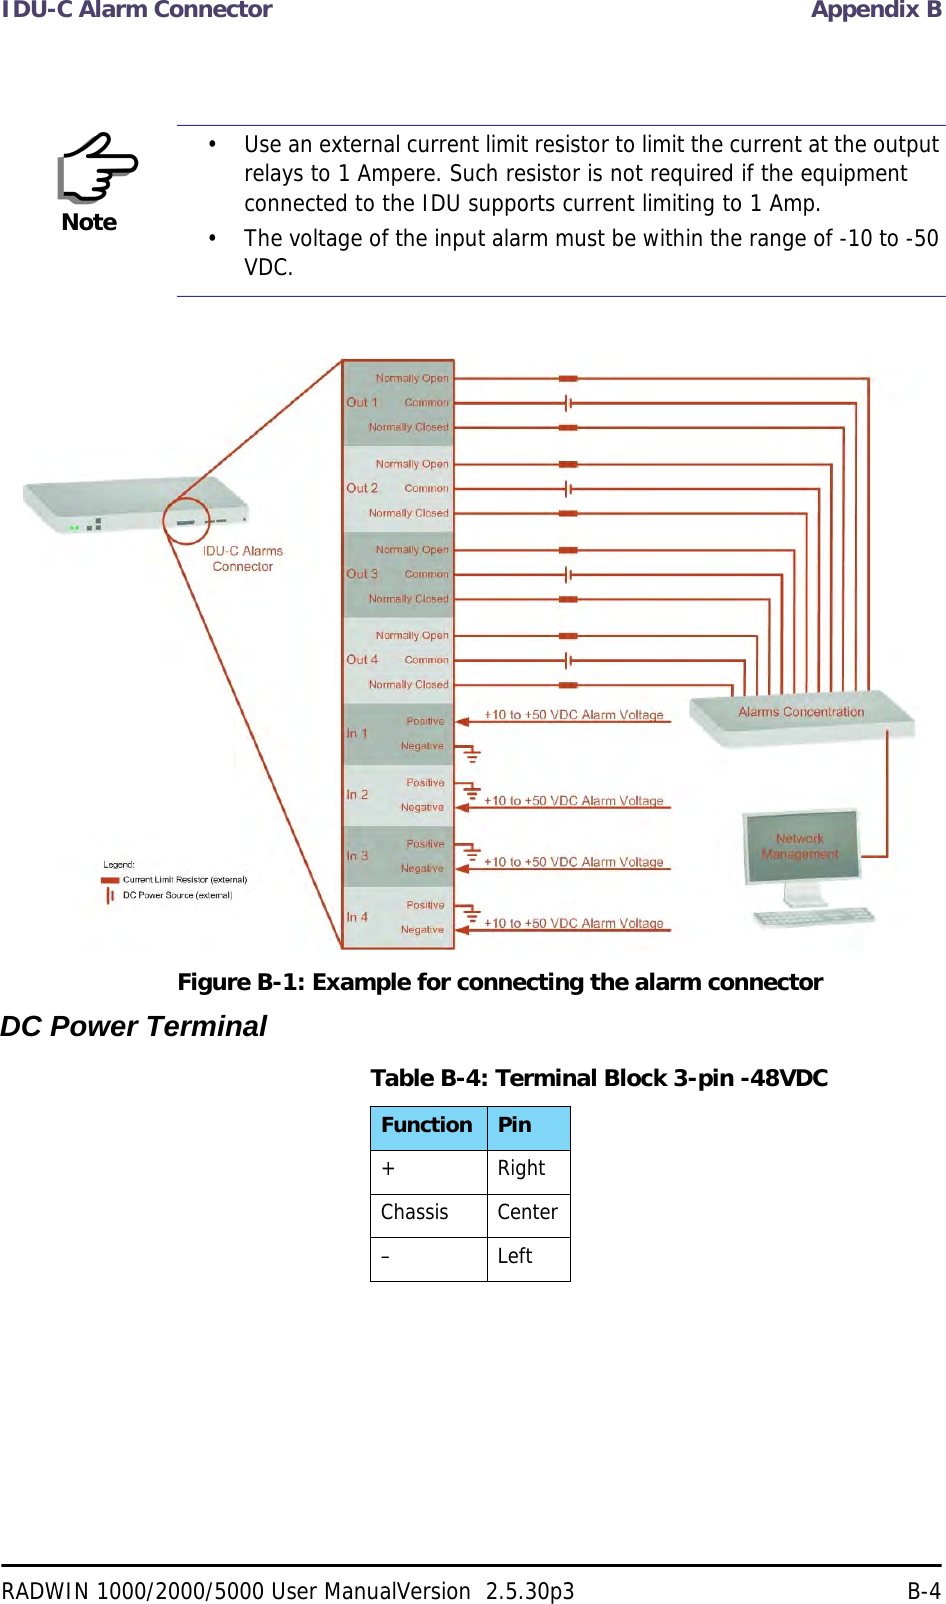 IDU-C Alarm Connector Appendix BRADWIN 1000/2000/5000 User ManualVersion  2.5.30p3 B-4Figure B-1: Example for connecting the alarm connectorDC Power TerminalNote• Use an external current limit resistor to limit the current at the output relays to 1 Ampere. Such resistor is not required if the equipment connected to the IDU supports current limiting to 1 Amp.• The voltage of the input alarm must be within the range of -10 to -50 VDC.Table B-4: Terminal Block 3-pin -48VDCFunction Pin+ RightChassis Center– Left